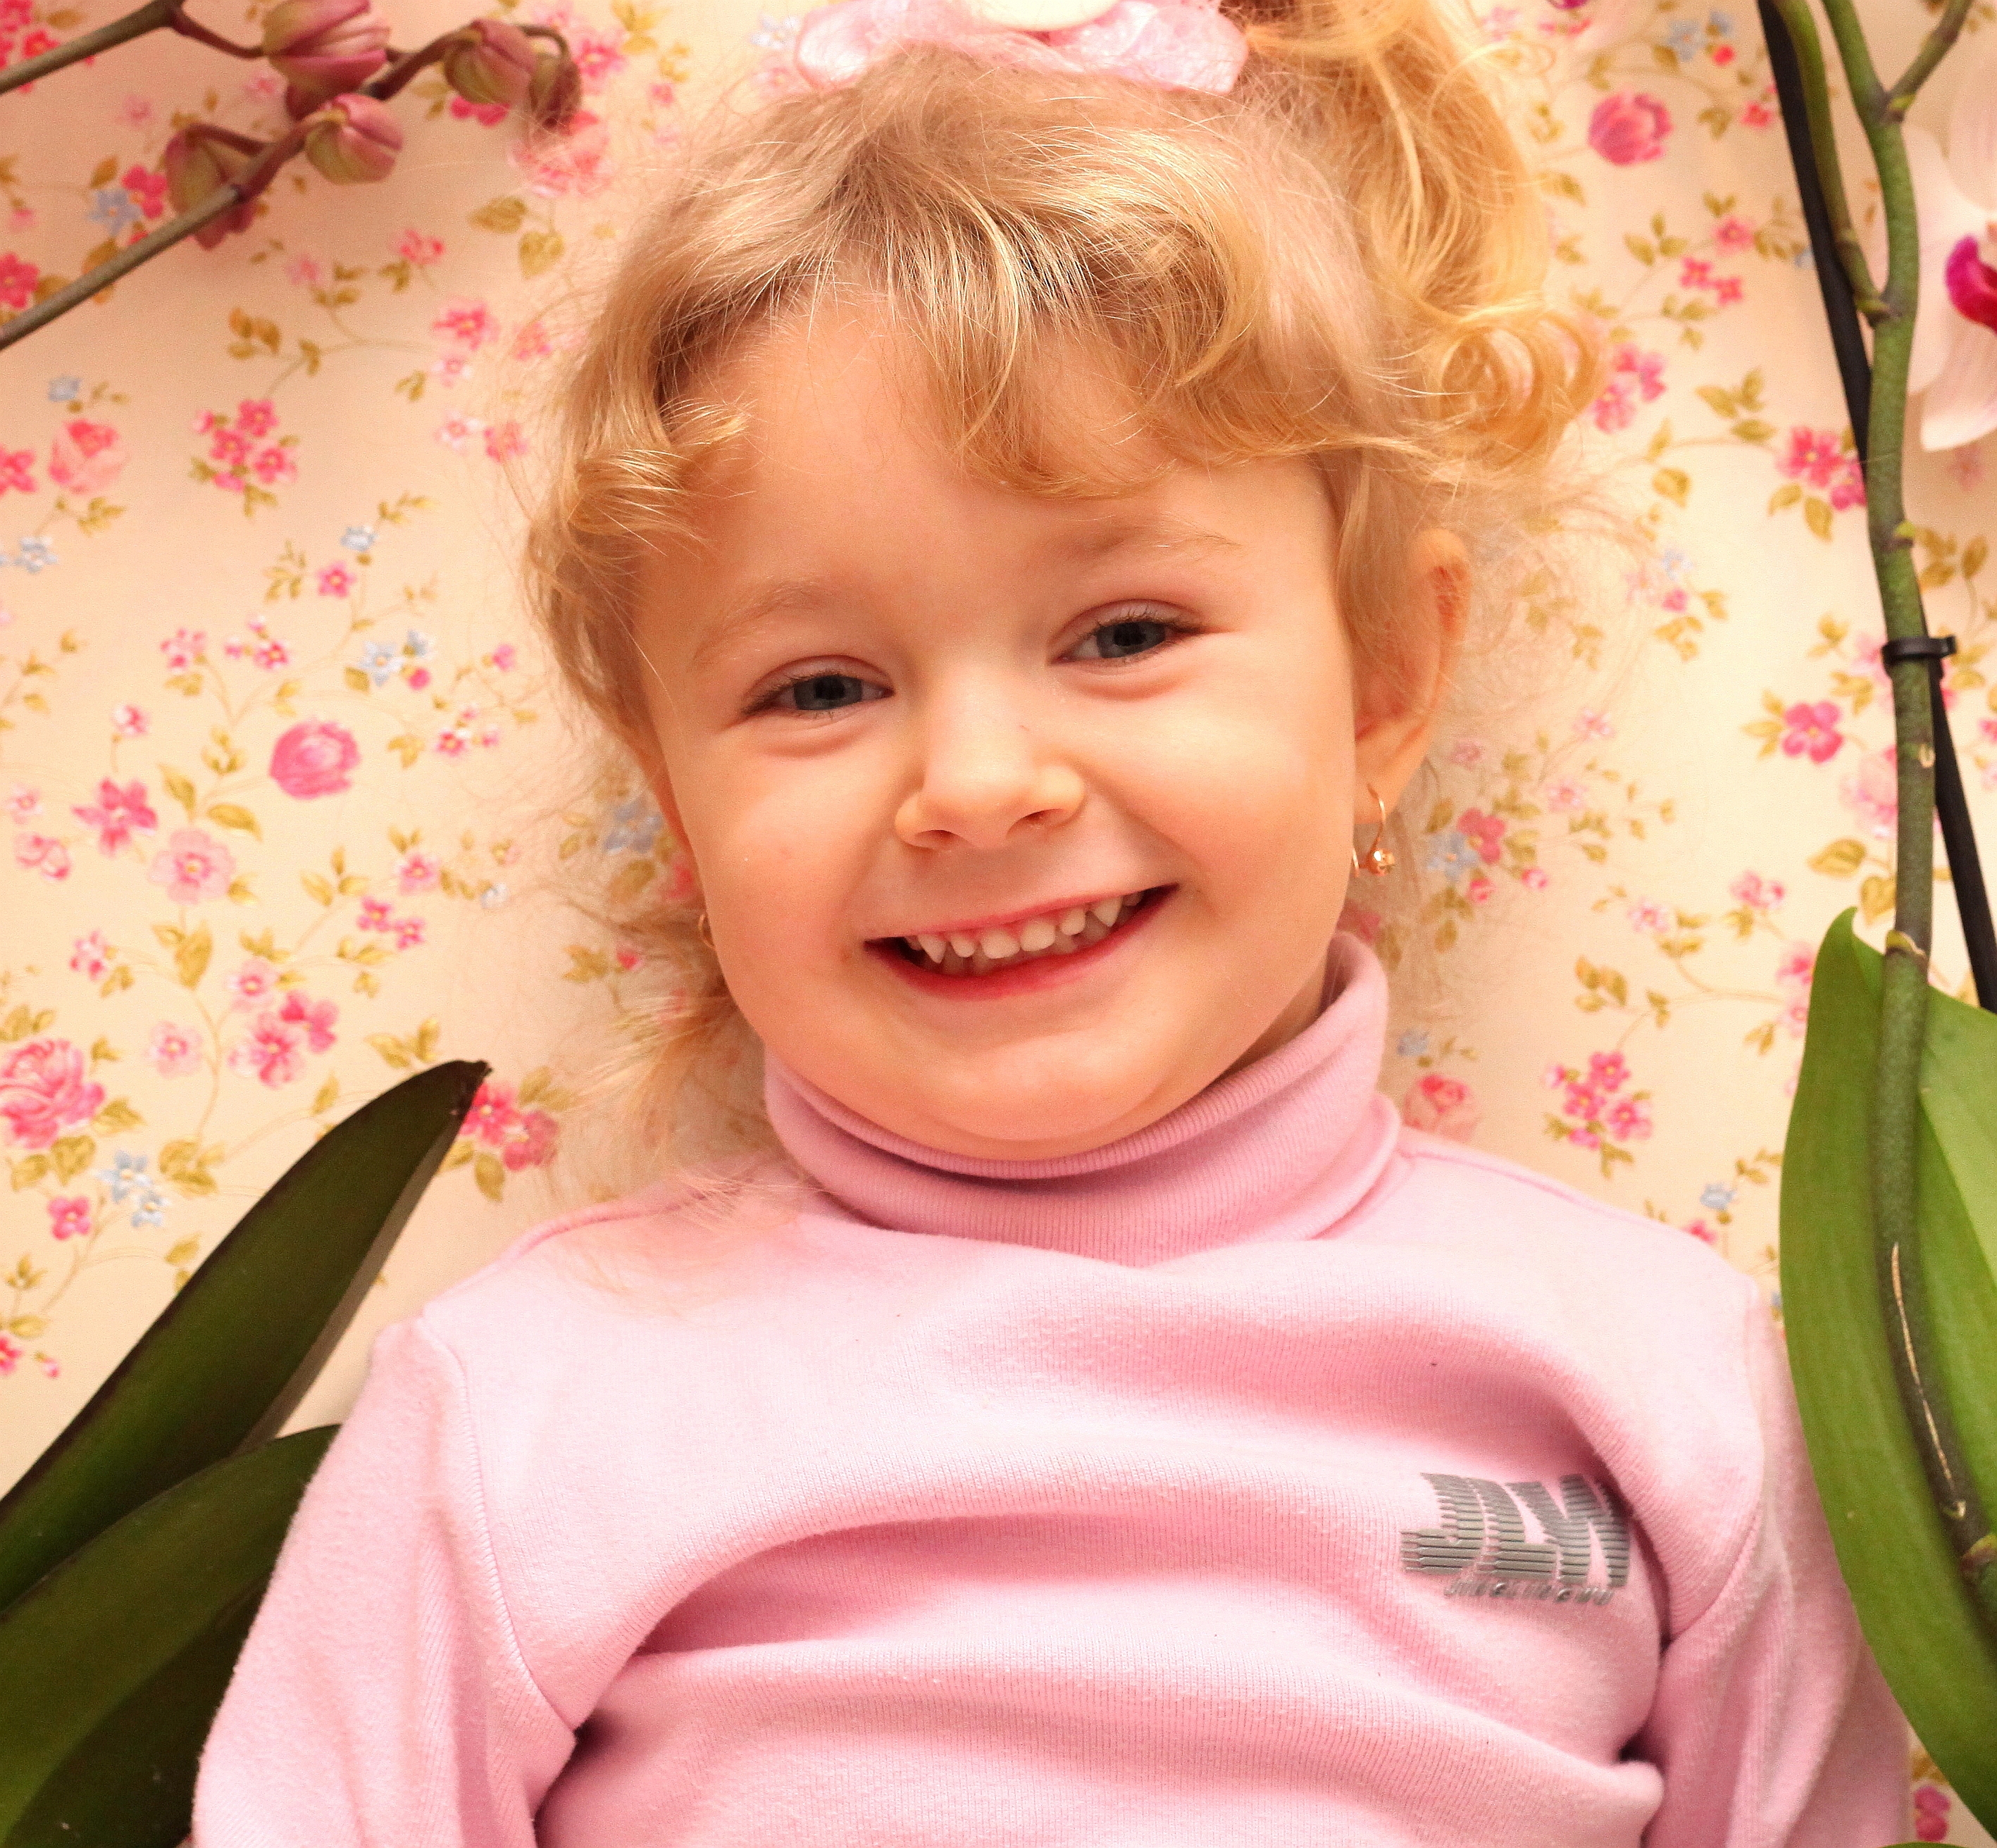 a young cute blond smiling baby girl, photo 1